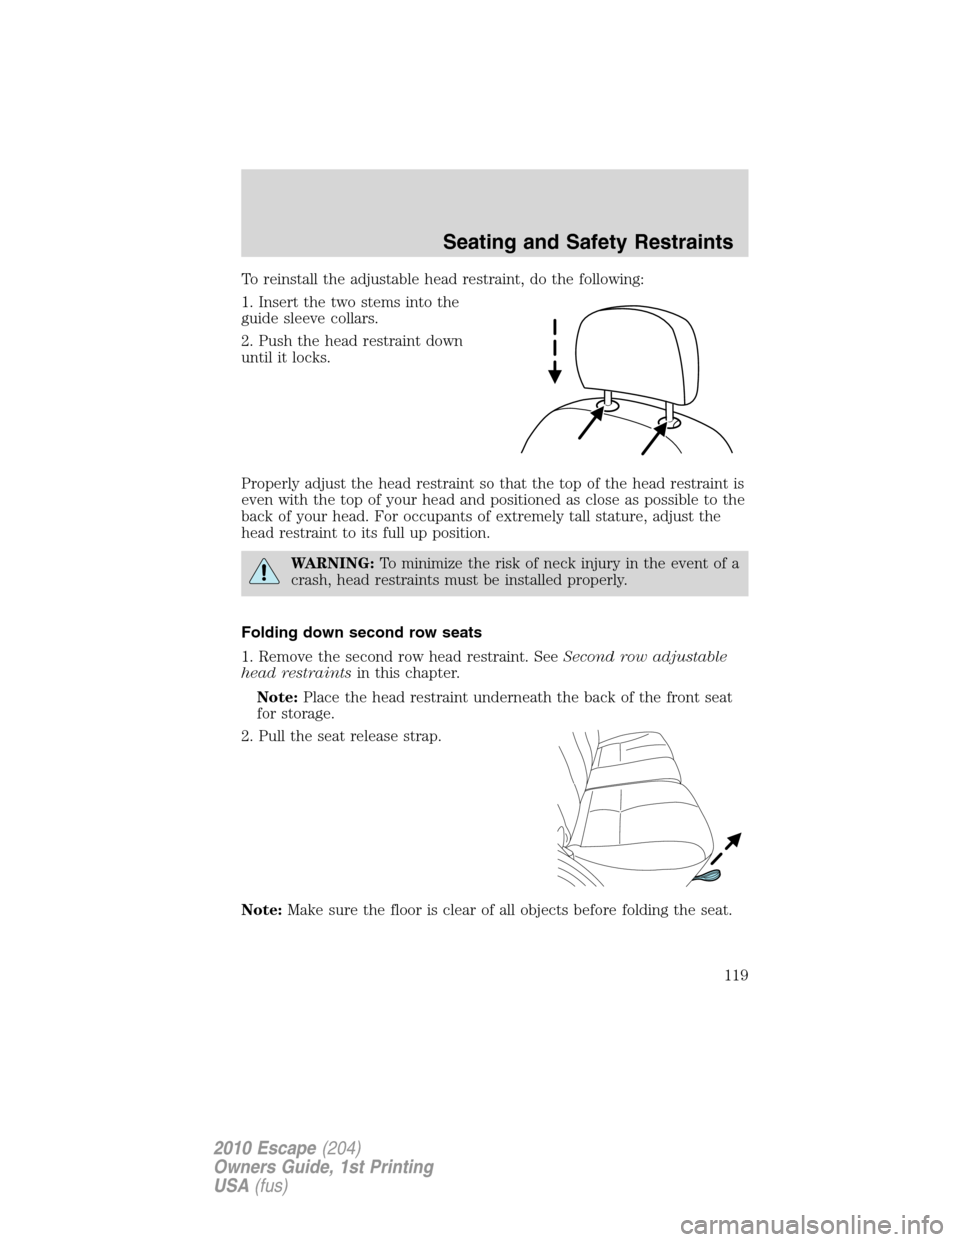 FORD ESCAPE 2010 2.G Owners Manual To reinstall the adjustable head restraint, do the following:
1. Insert the two stems into the
guide sleeve collars.
2. Push the head restraint down
until it locks.
Properly adjust the head restraint 